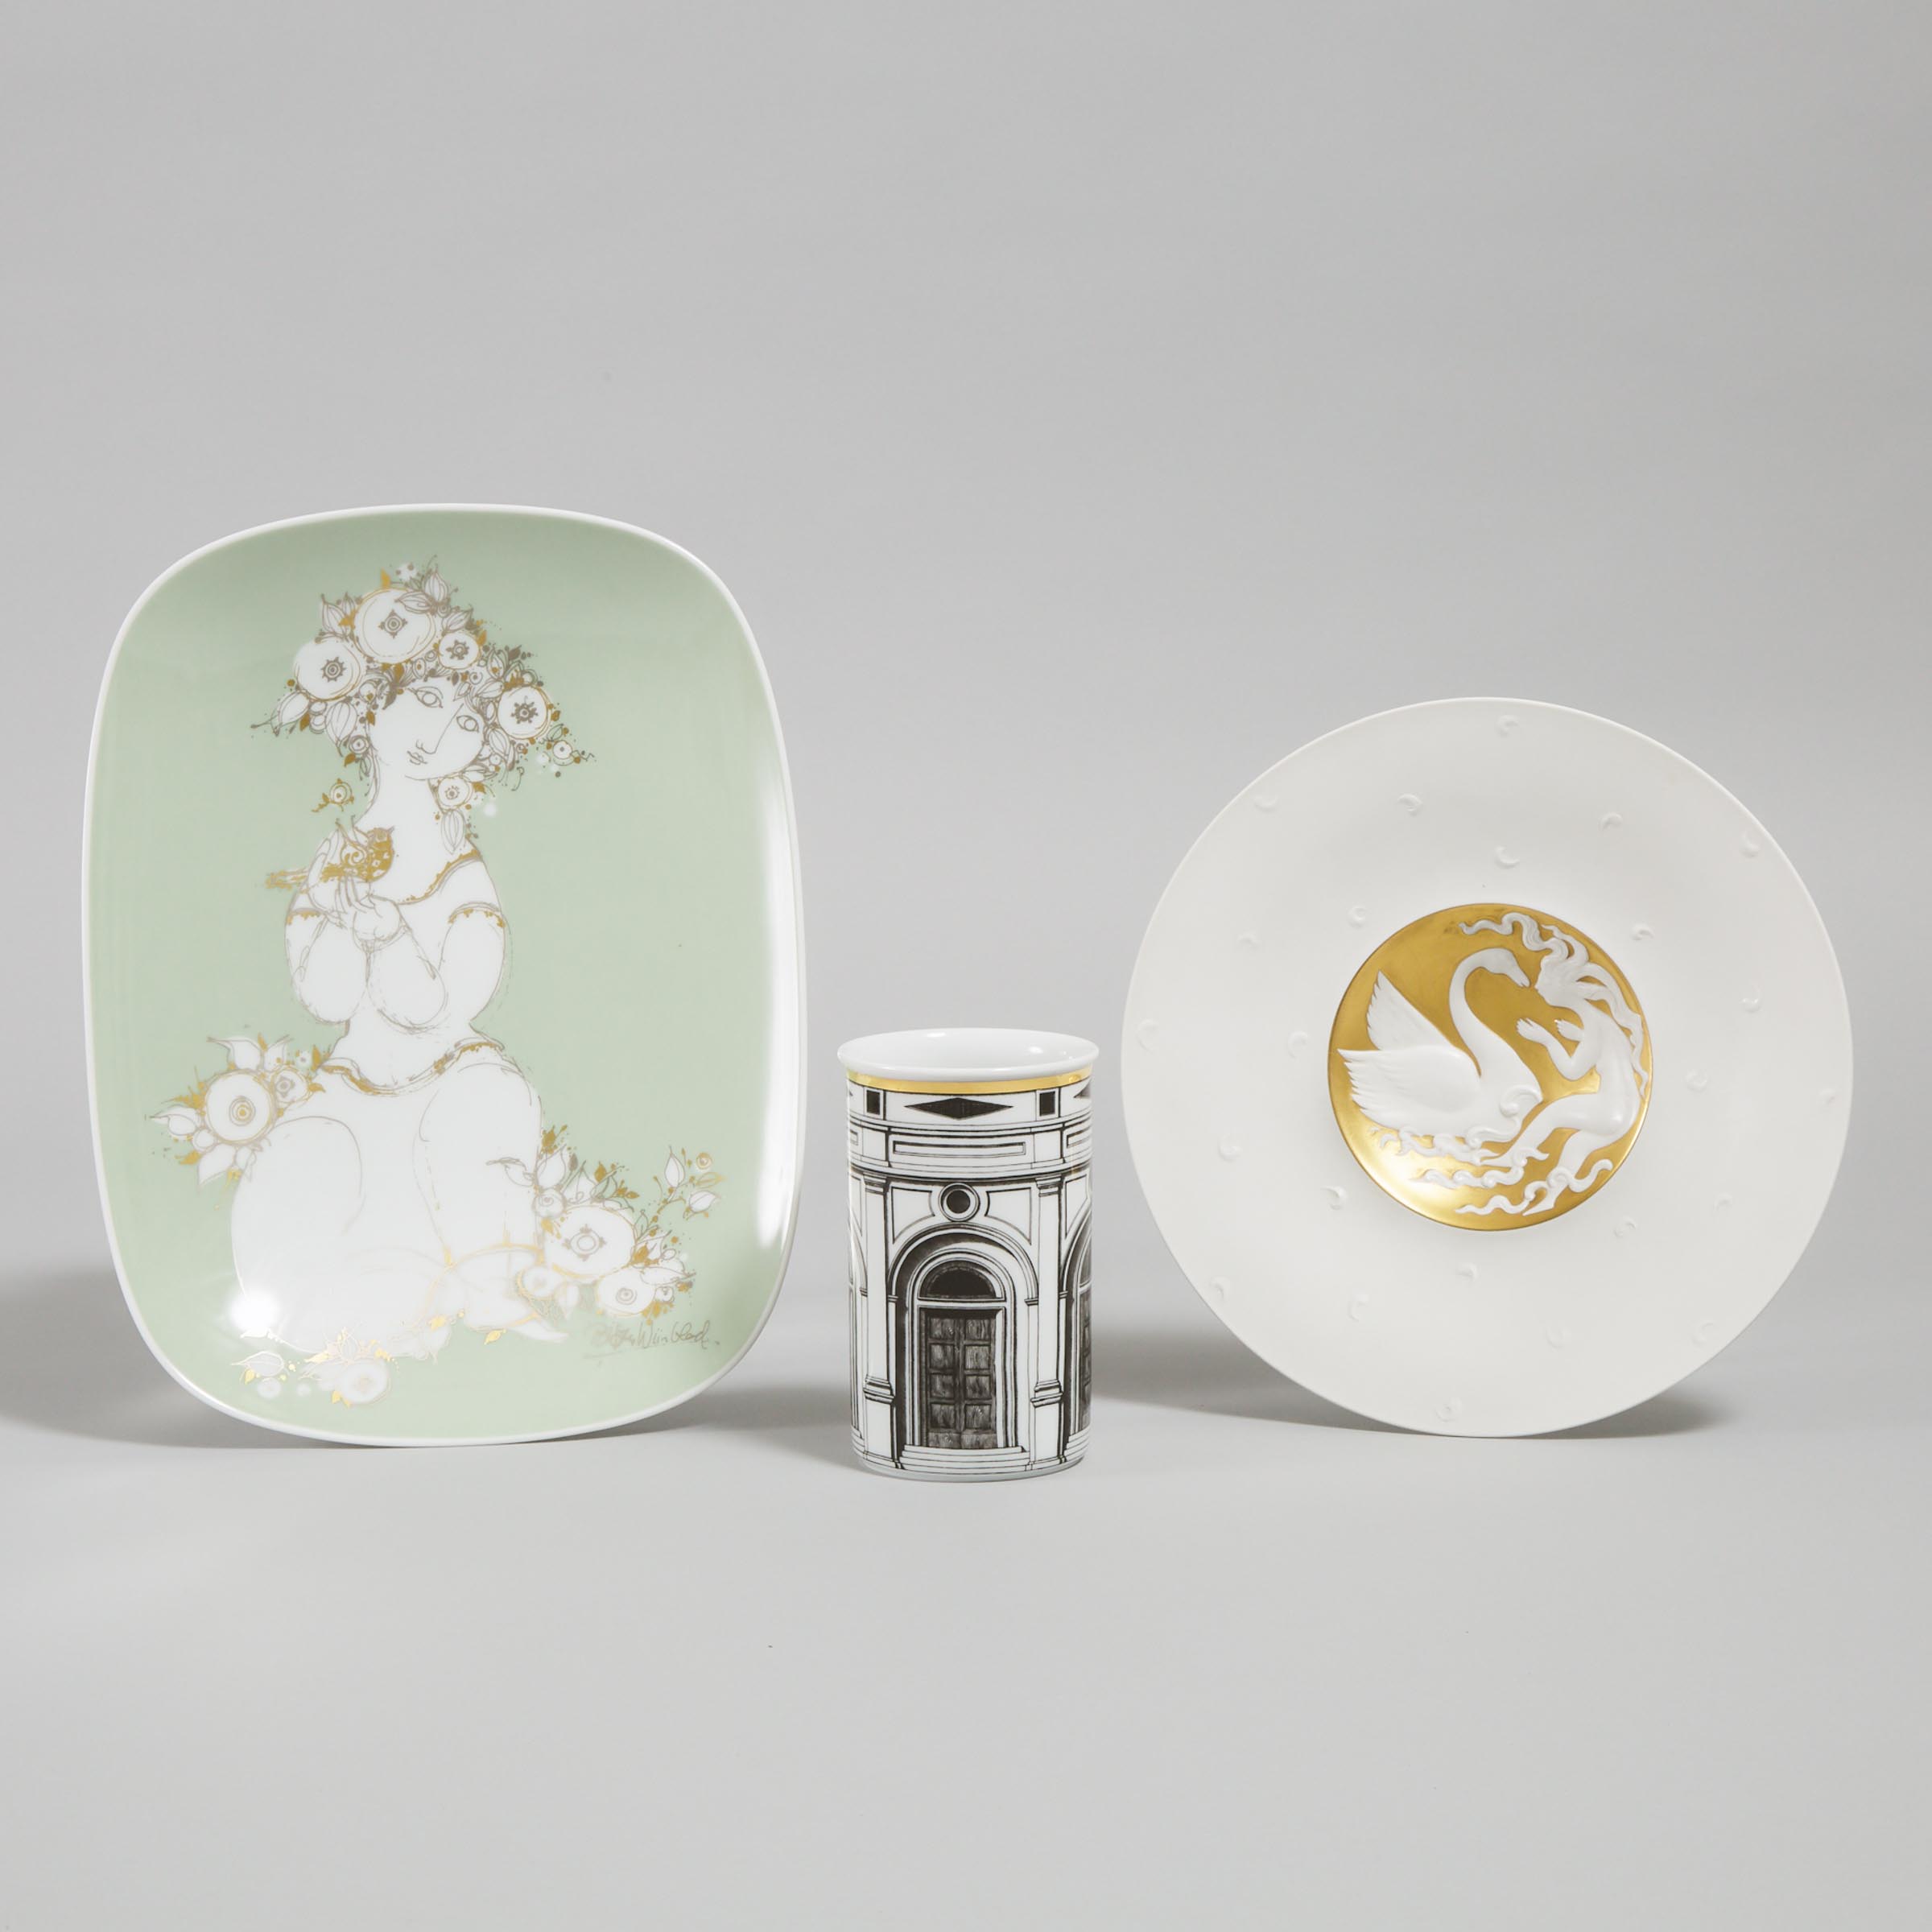 Rosenthal Bjorn Wiinblad 'Leda and the Swan' Dish and an Oblong Dish, and a Fornasetti 'Palladiana' Vase, 20th century